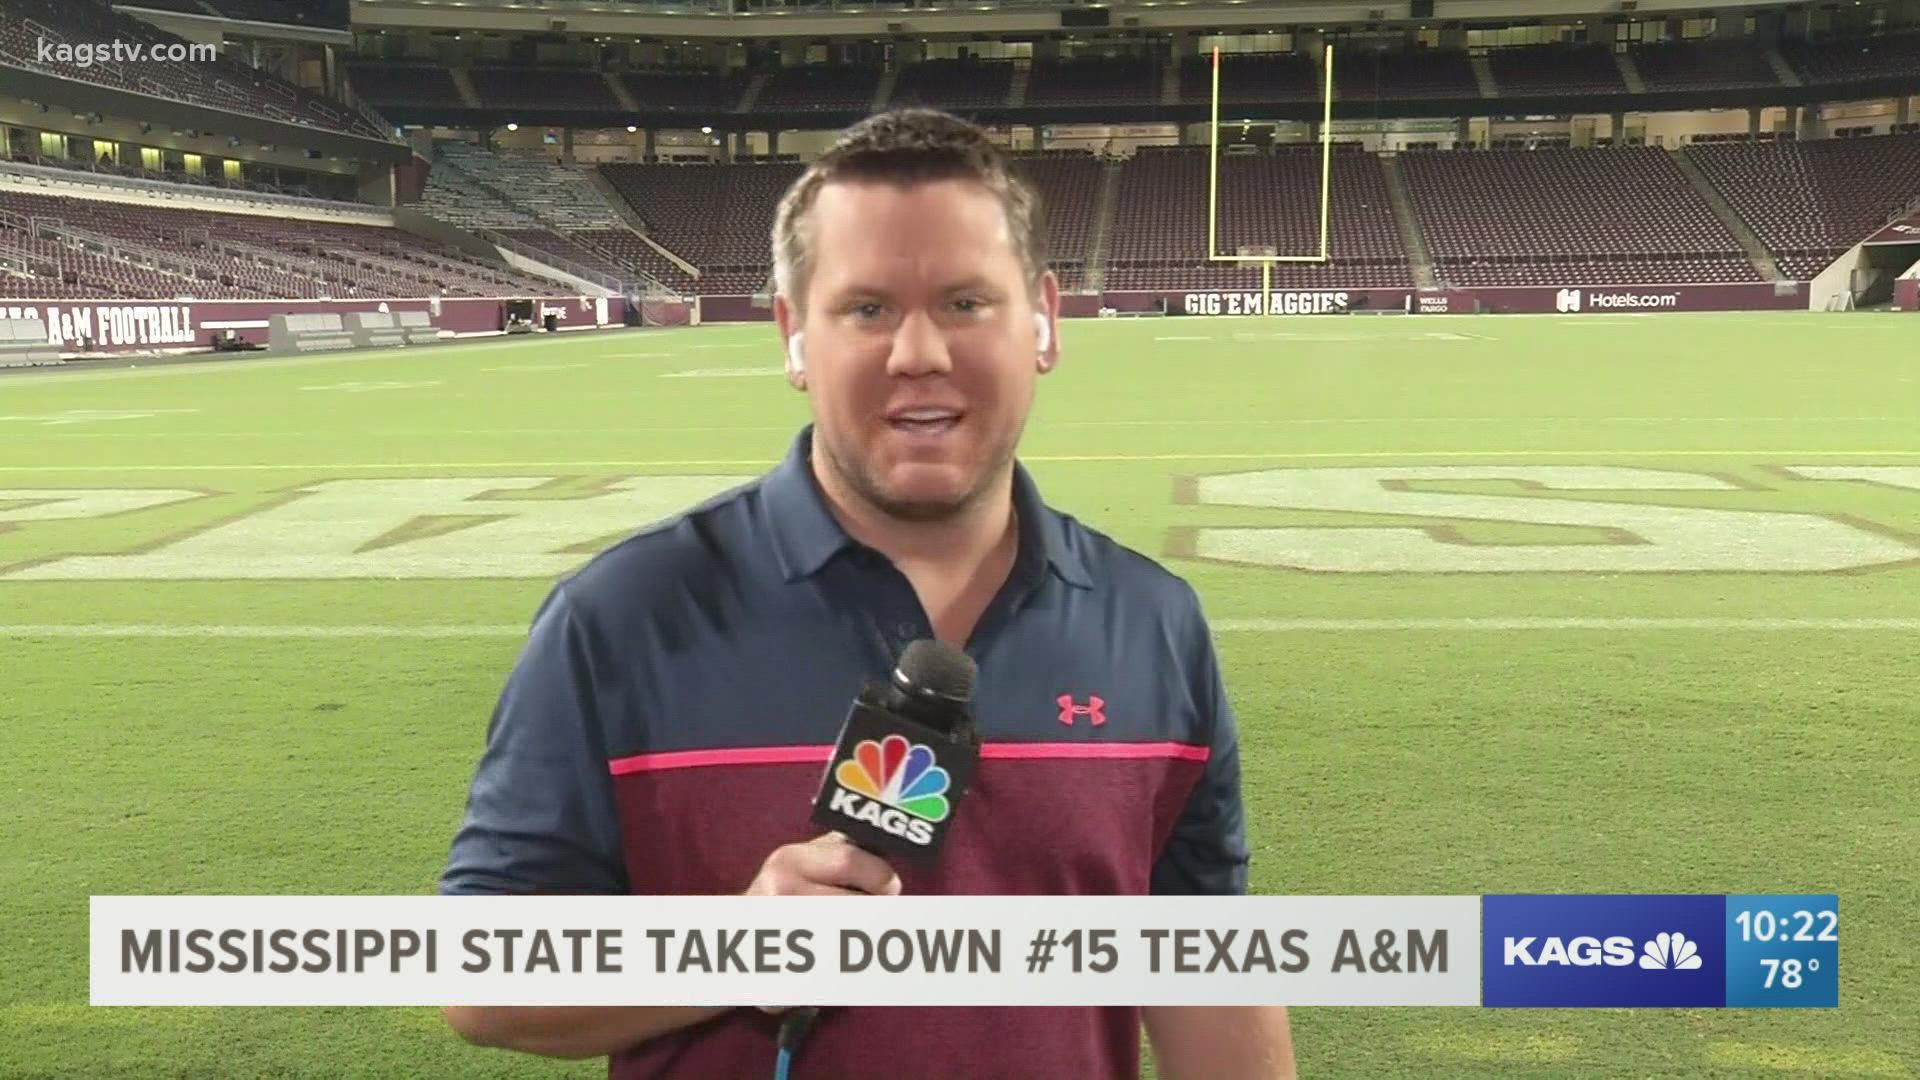 Live shot from Aggie game on 10-2